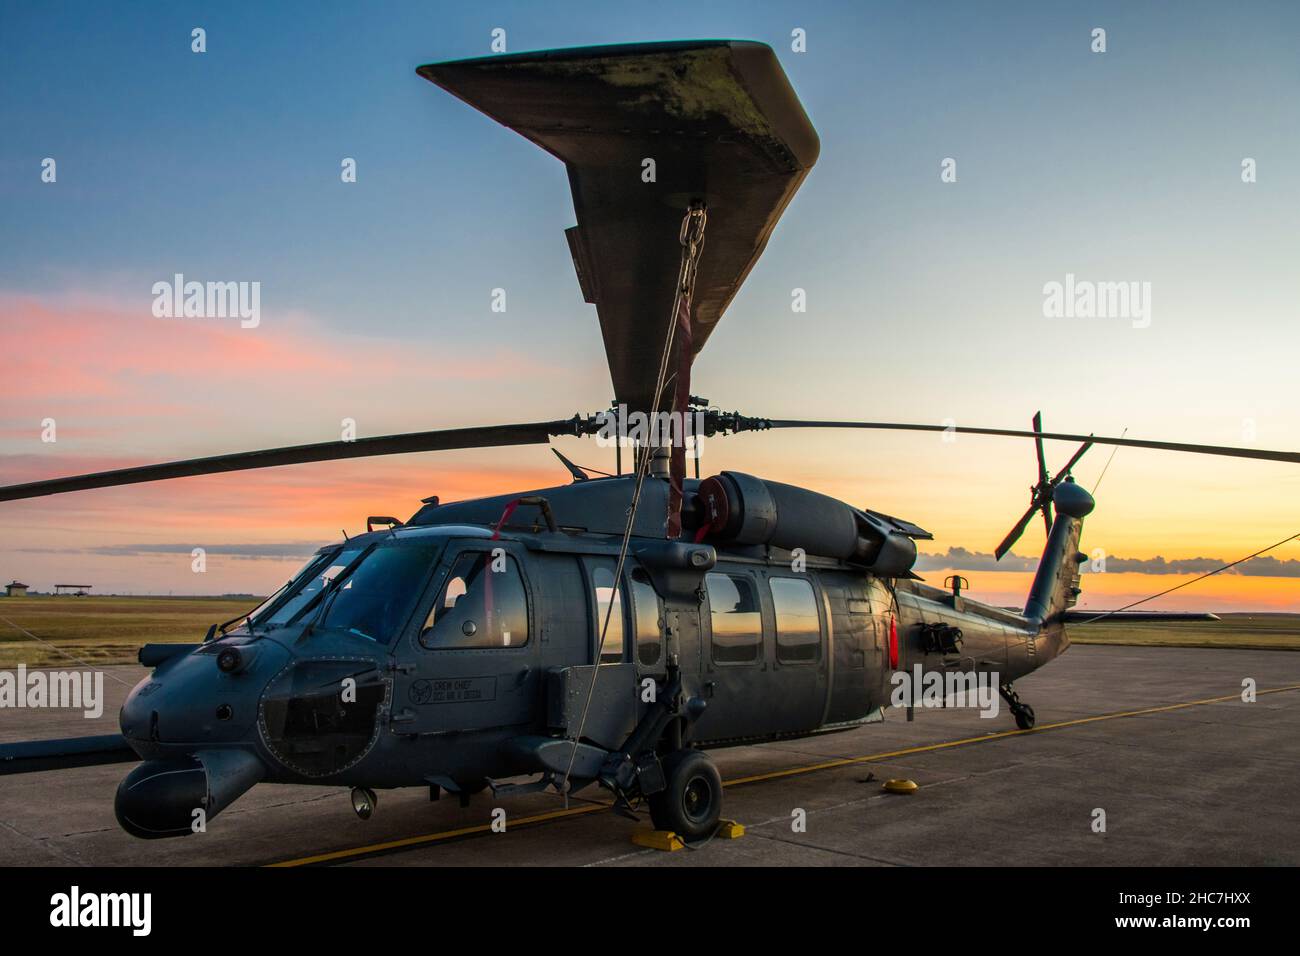 An HH-60 Pave Hawk from Kirtland Air Force Base, New Mexico, sits on a ramp at Sheppard AFB, Texas, Sept. 28, 2021. The arrival of the retired aircraft on Sept. 27 has been 30 years in the making as a request was submitted in April 1991 to have the 8HH-60 brought to Sheppard to be used as a ground instructional training aircraft for 363rd Training Squadron armament and munitions Airmen in Training. The aircraft could also be used by other technical training programs here. (U.S. Air Force photo by 2nd Lt. Logan Thomas) Stock Photo